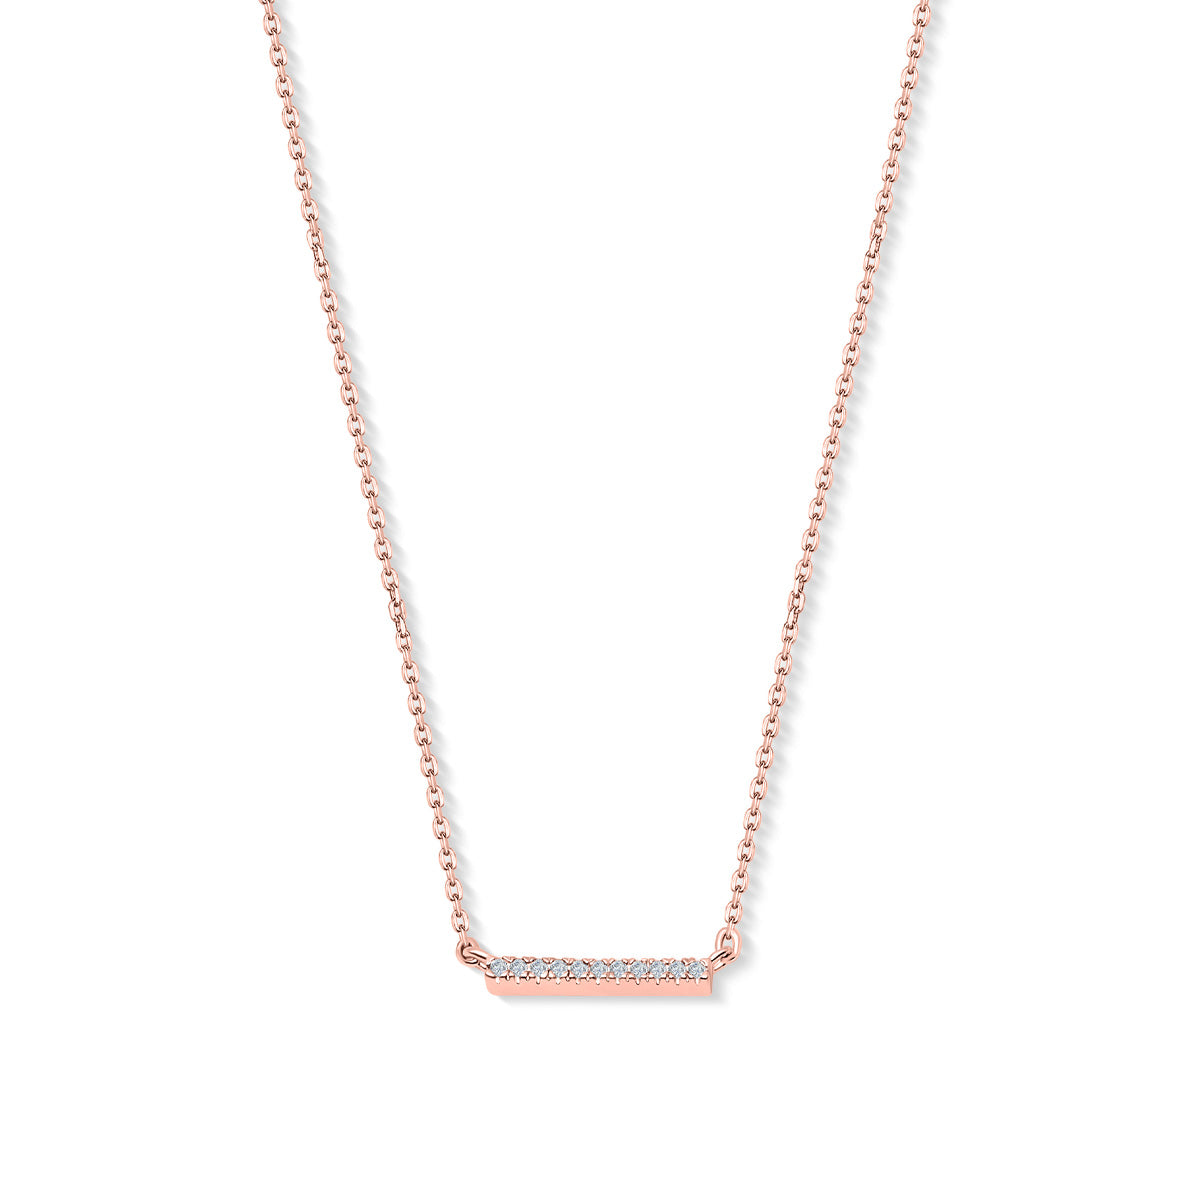 Rose gold plated bar chain necklace